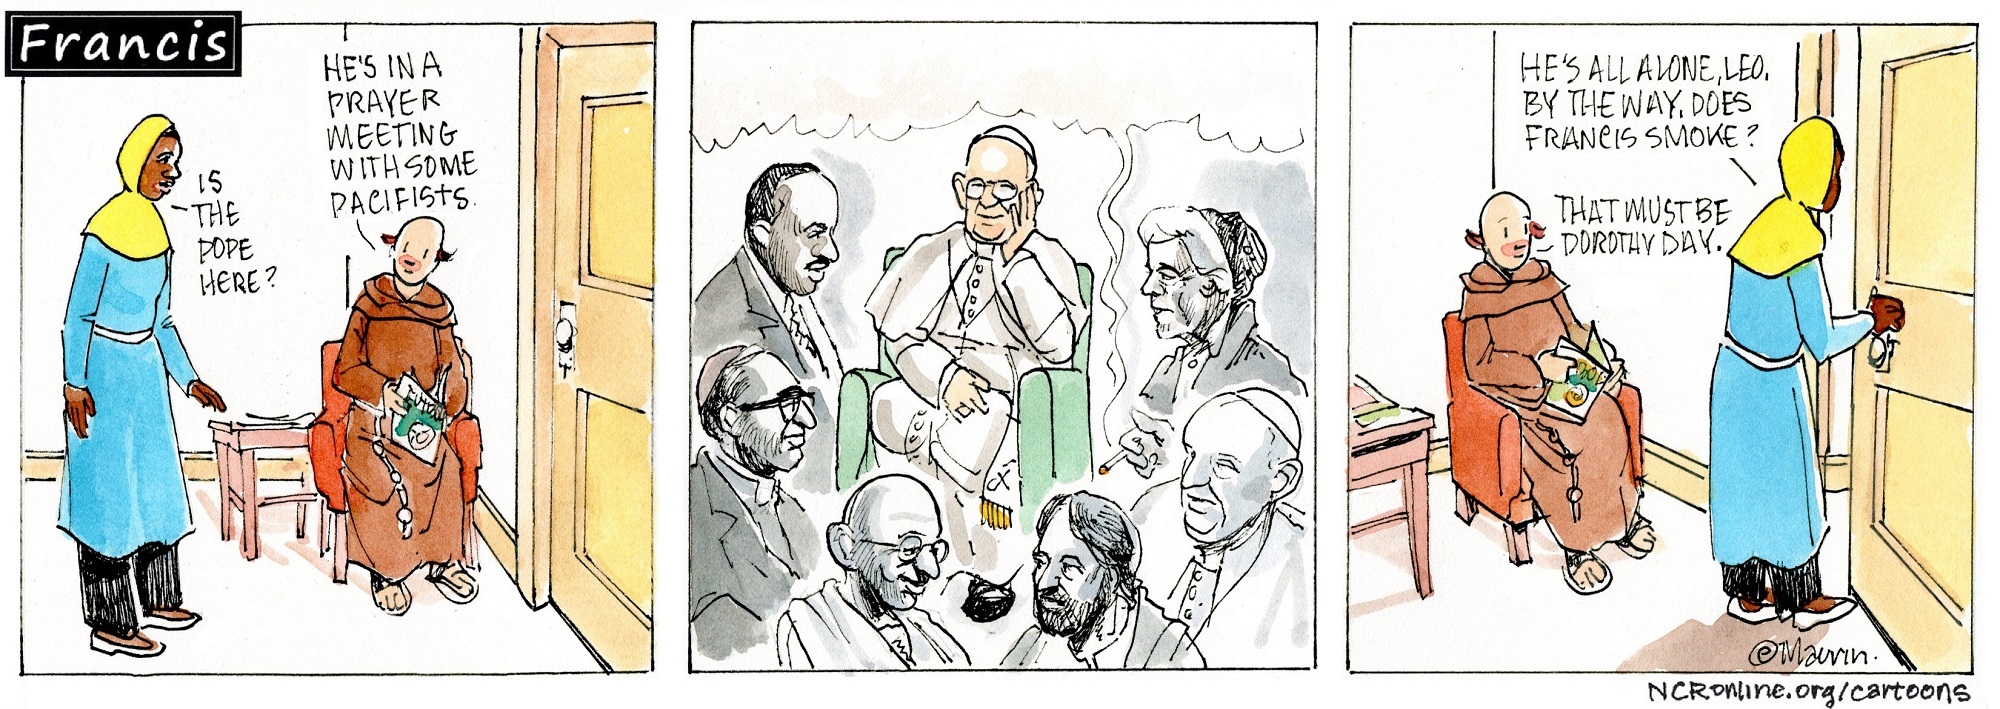 Francis, the comic strip: Francis has a prayer meeting with some pacifists.